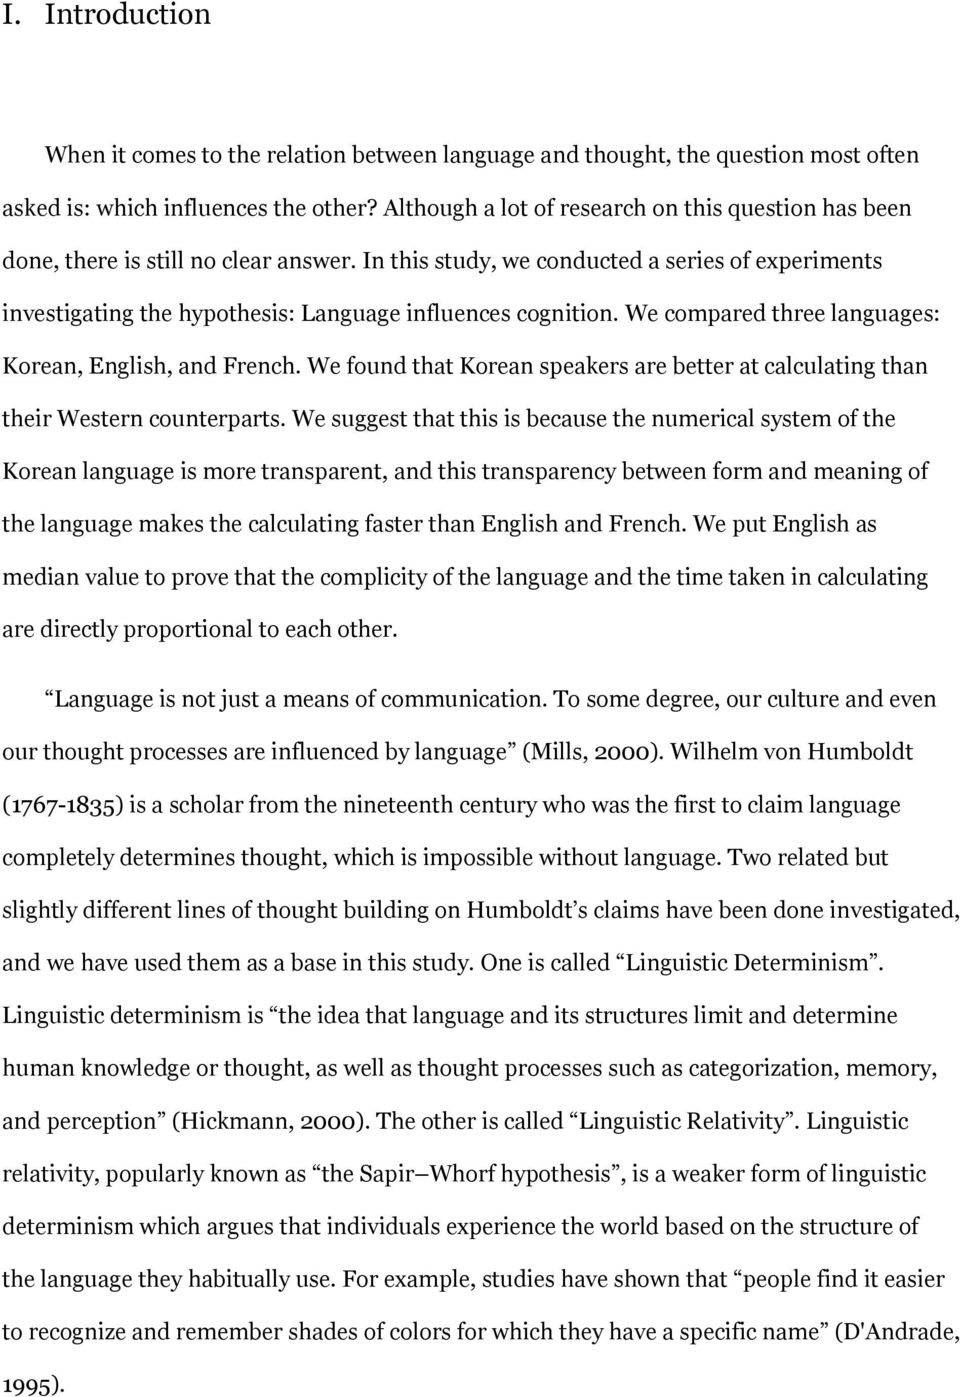 In this study, we conducted a series of experiments investigating the hypothesis: Language influences cognition. We compared three languages: Korean, English, and French.